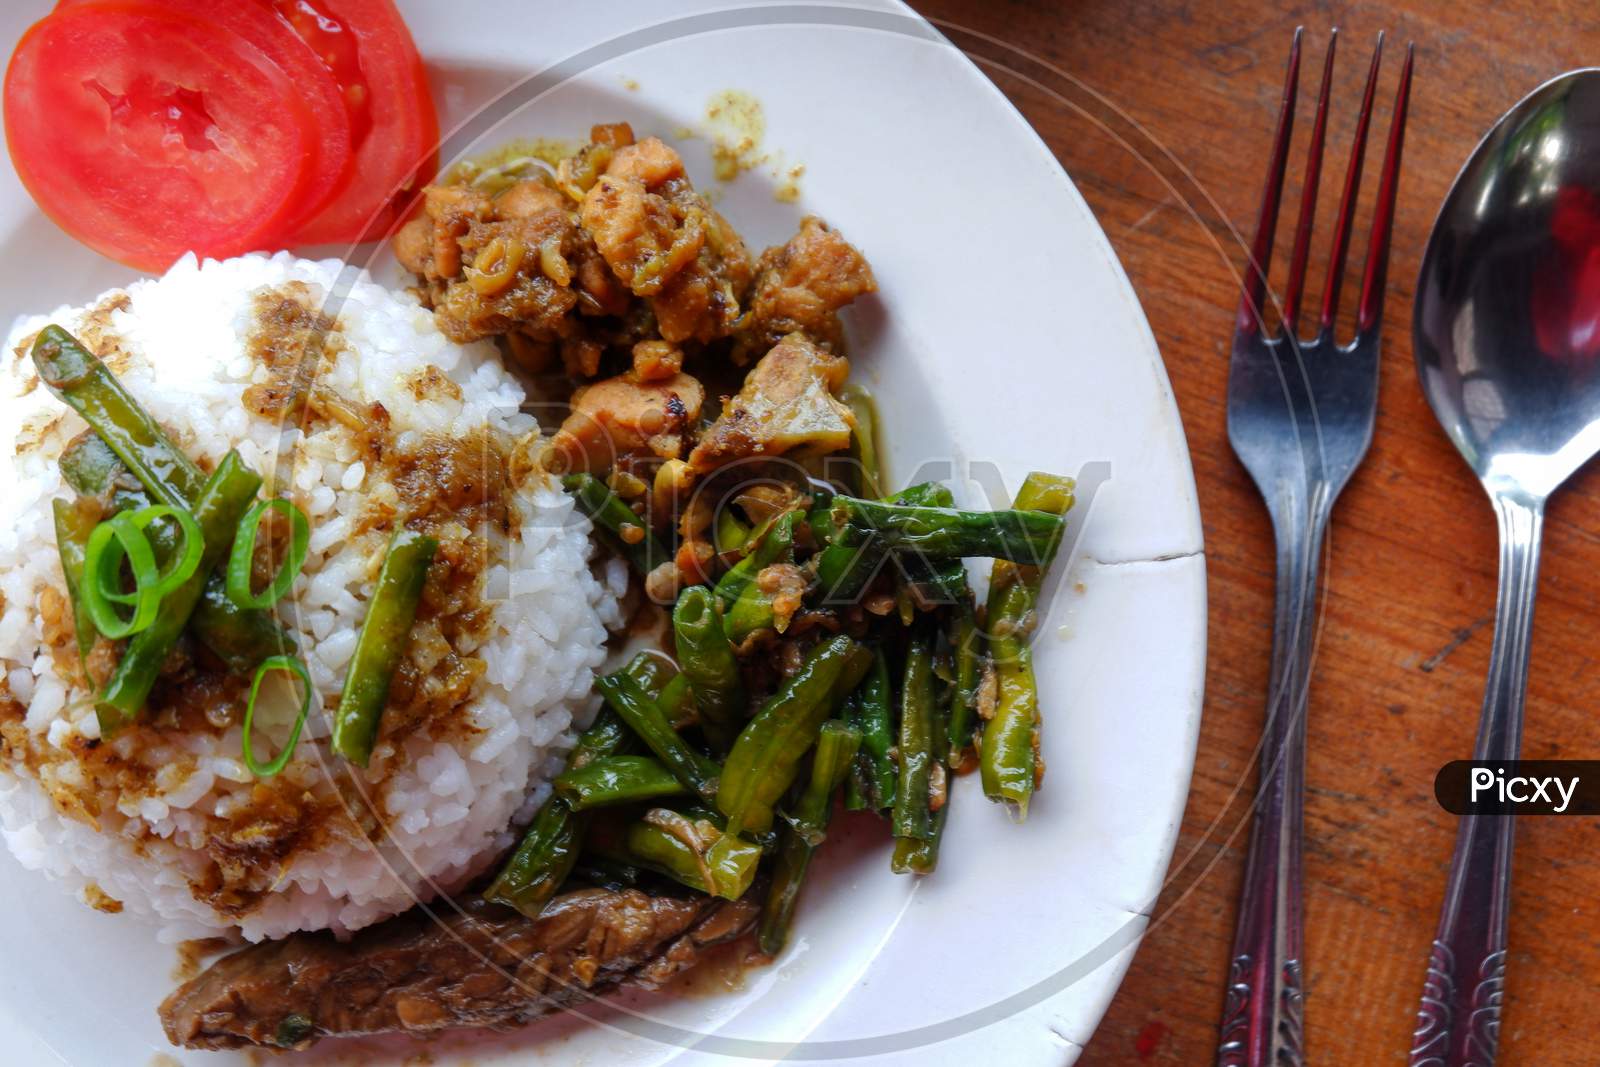 Heavy Food Photos Include Rice, Peanuts, Meat And Tea